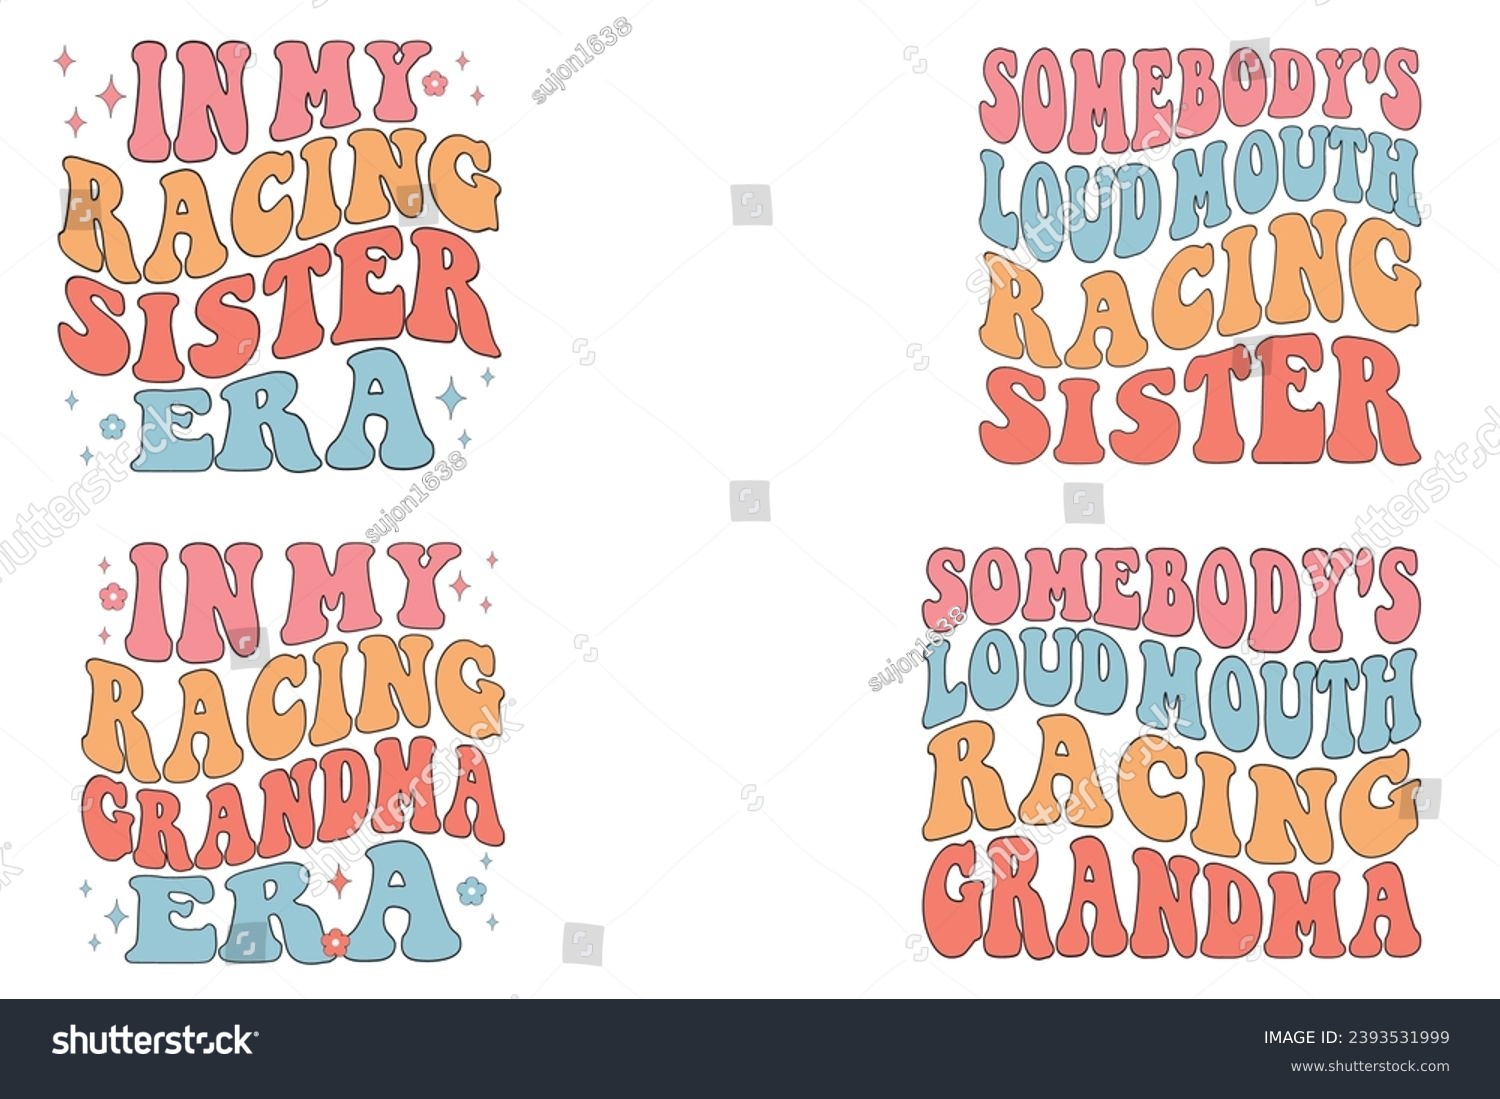 SVG of  In My Racing sister Era, Somebody's Loud MOUTH Racing sister, In My Racing grandma Era, Somebody's Loud MOUTH Racing grandma retro wavy T-shirt svg